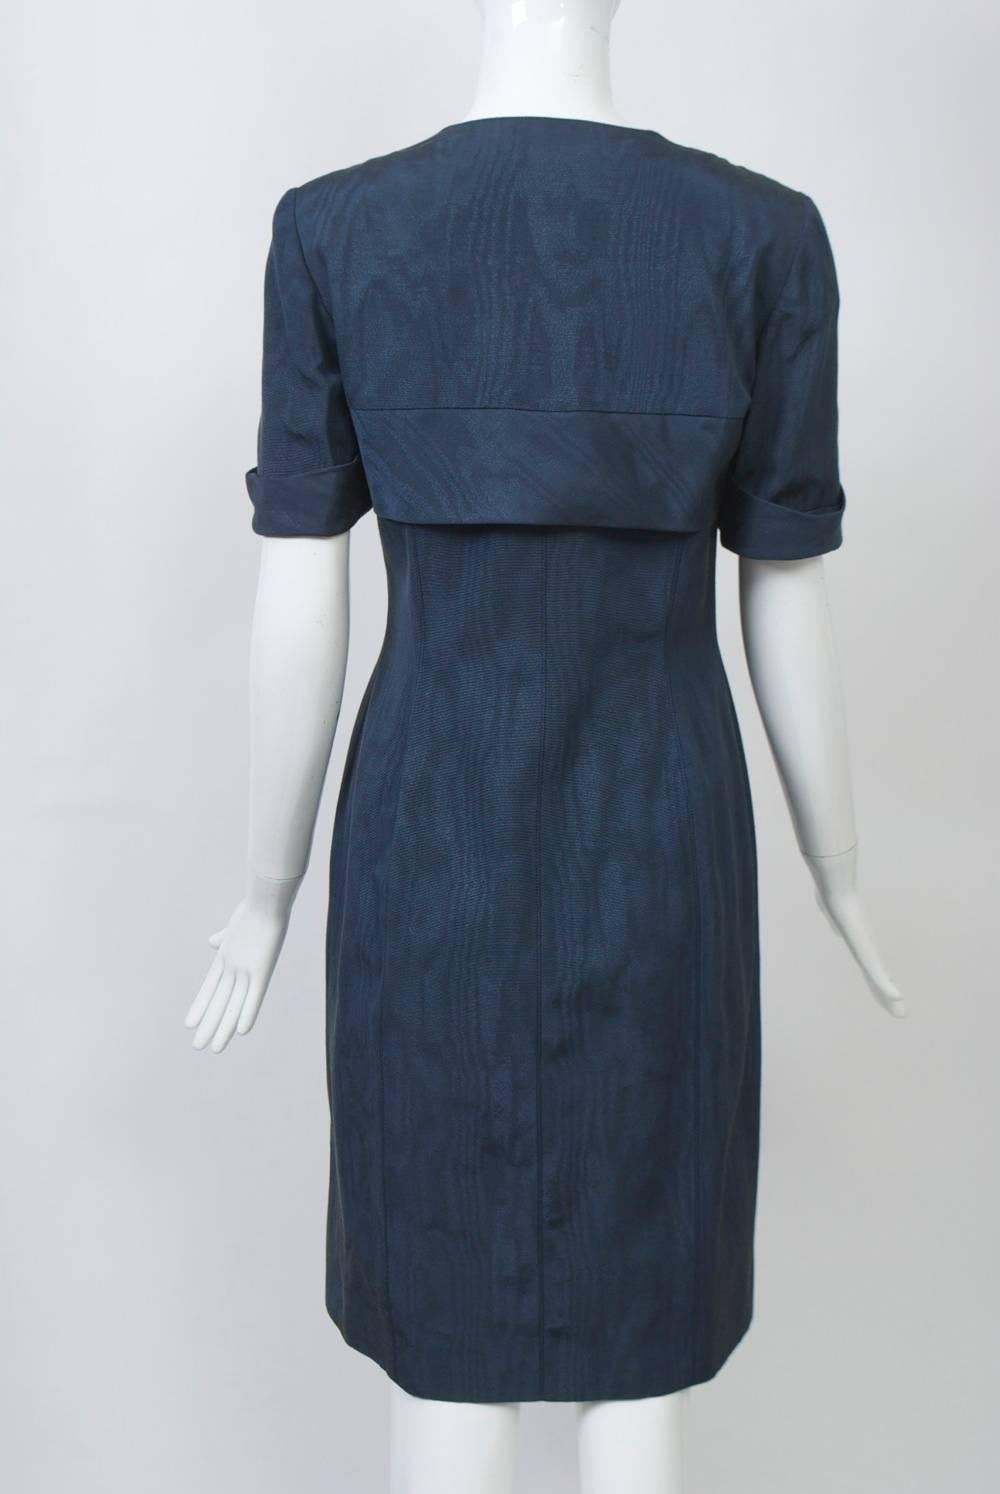 Ungaro Steel Blue 1980s Dress In Excellent Condition For Sale In Alford, MA